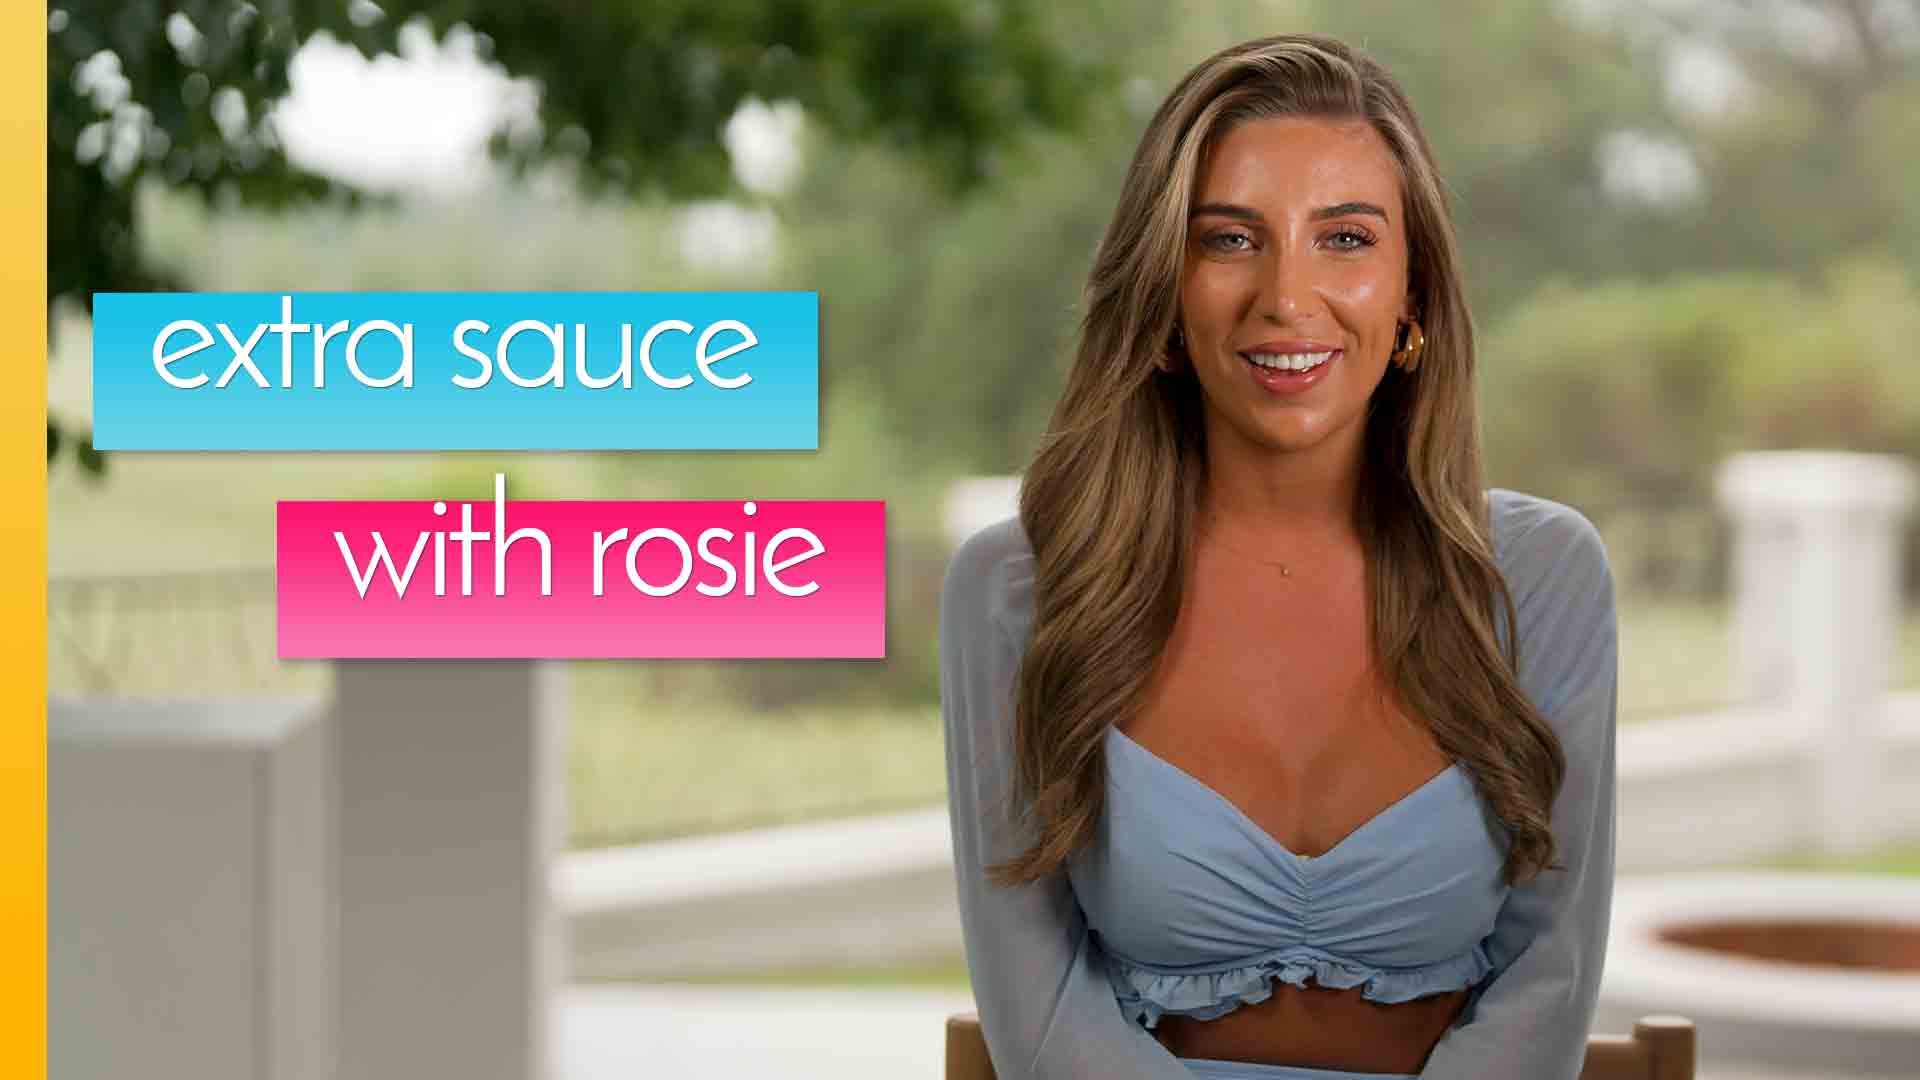 Bombshell Rosie tells all about her unbelievable experience! Love